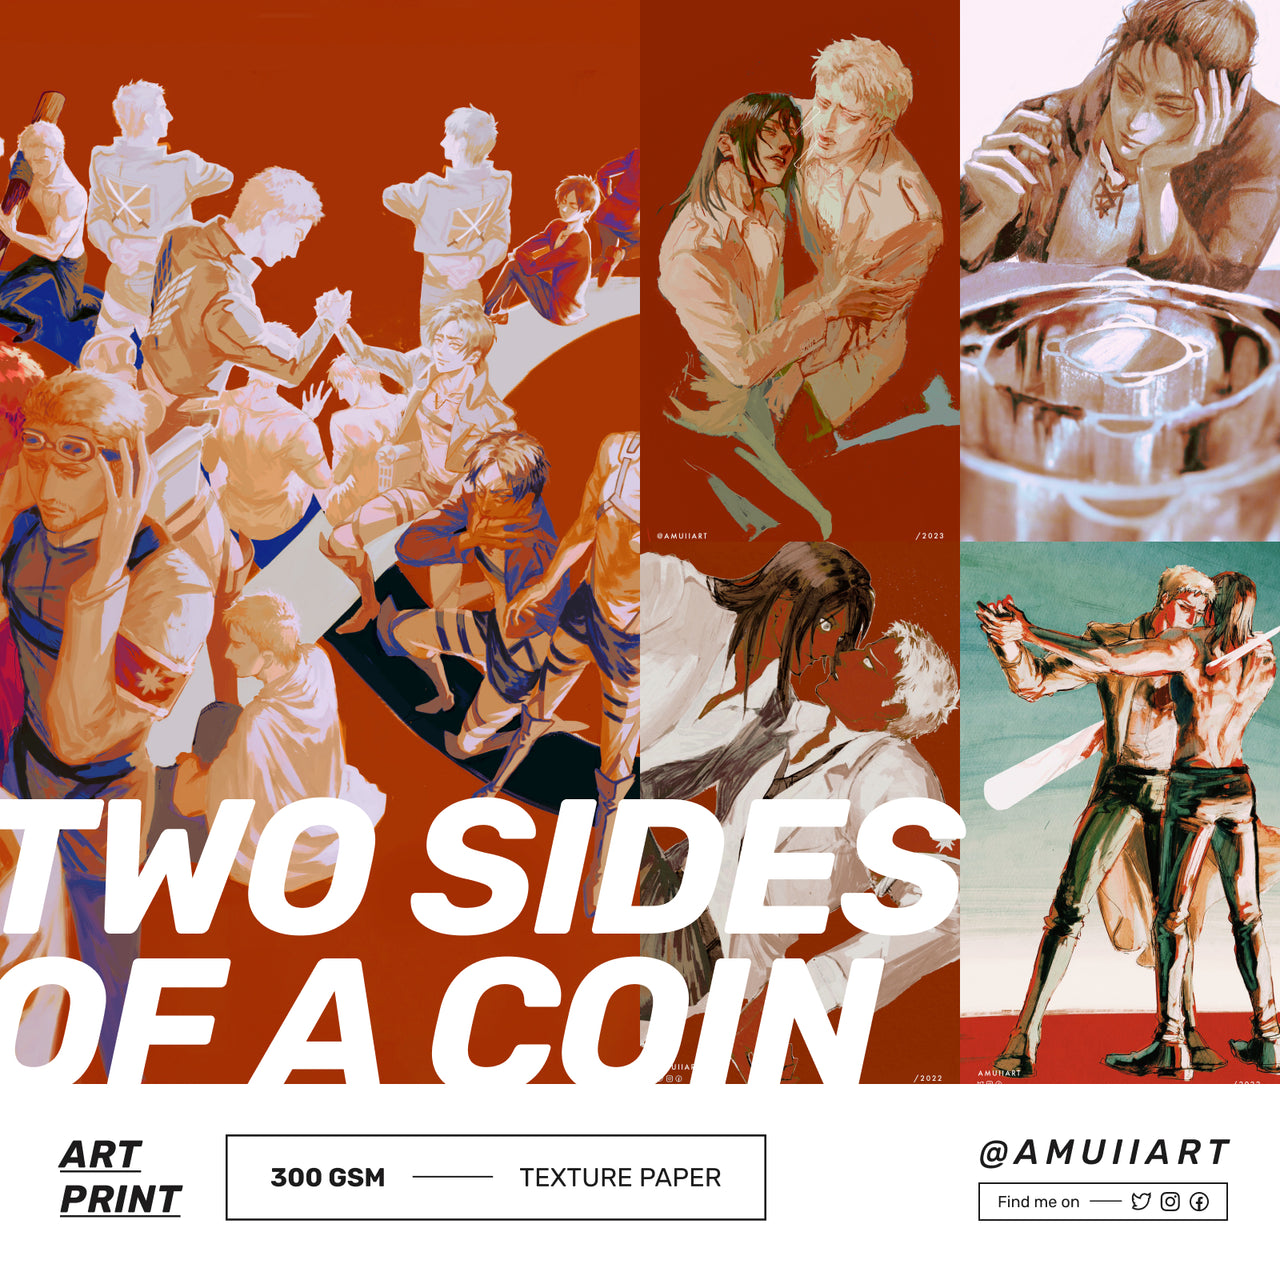 Two sides of a coin / AOT Art print